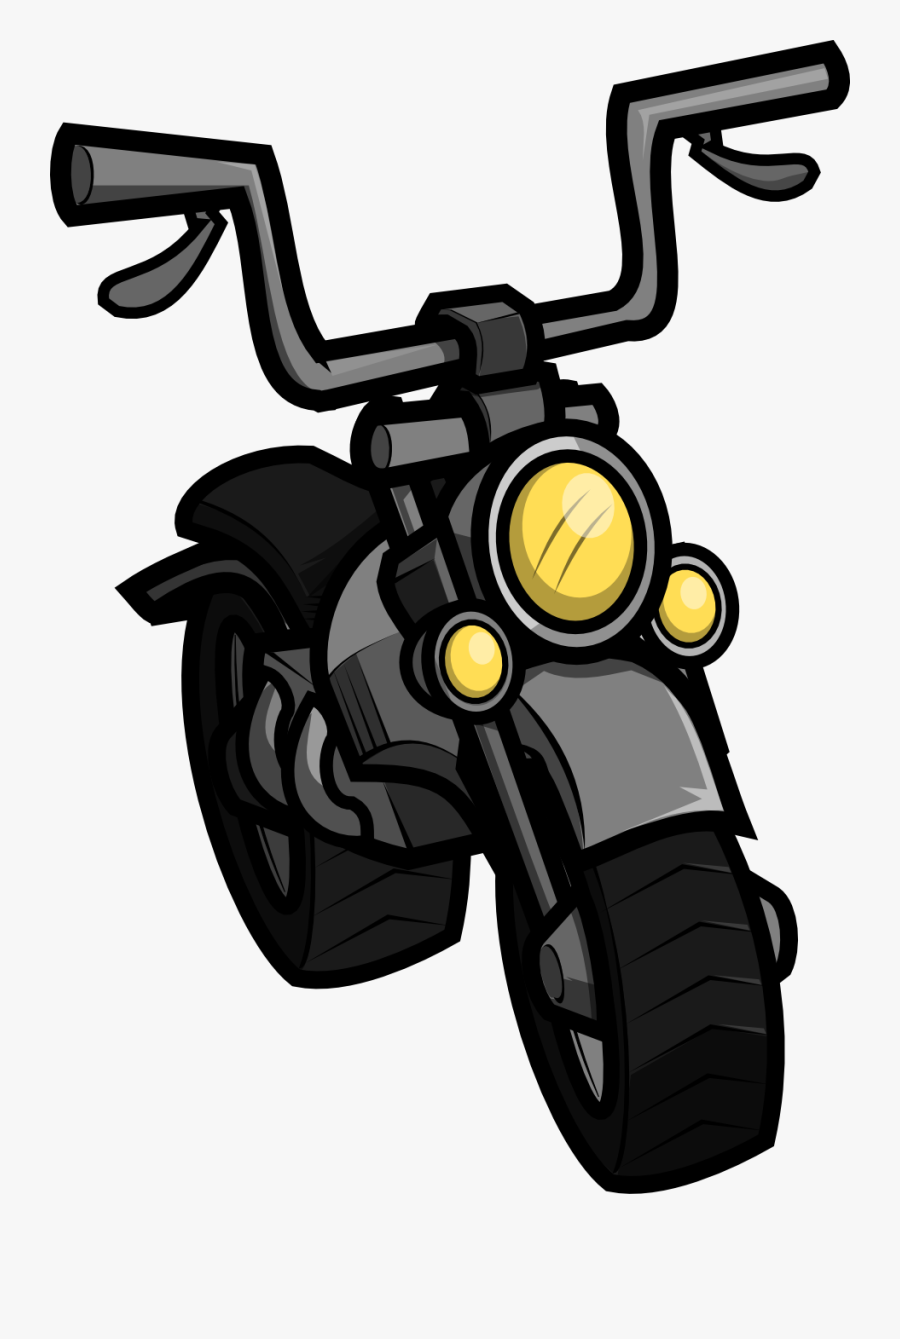 Motorcycle Clip Art With Girls Free Clipart Images - Cartoon Motorcycle Clipart, Transparent Clipart